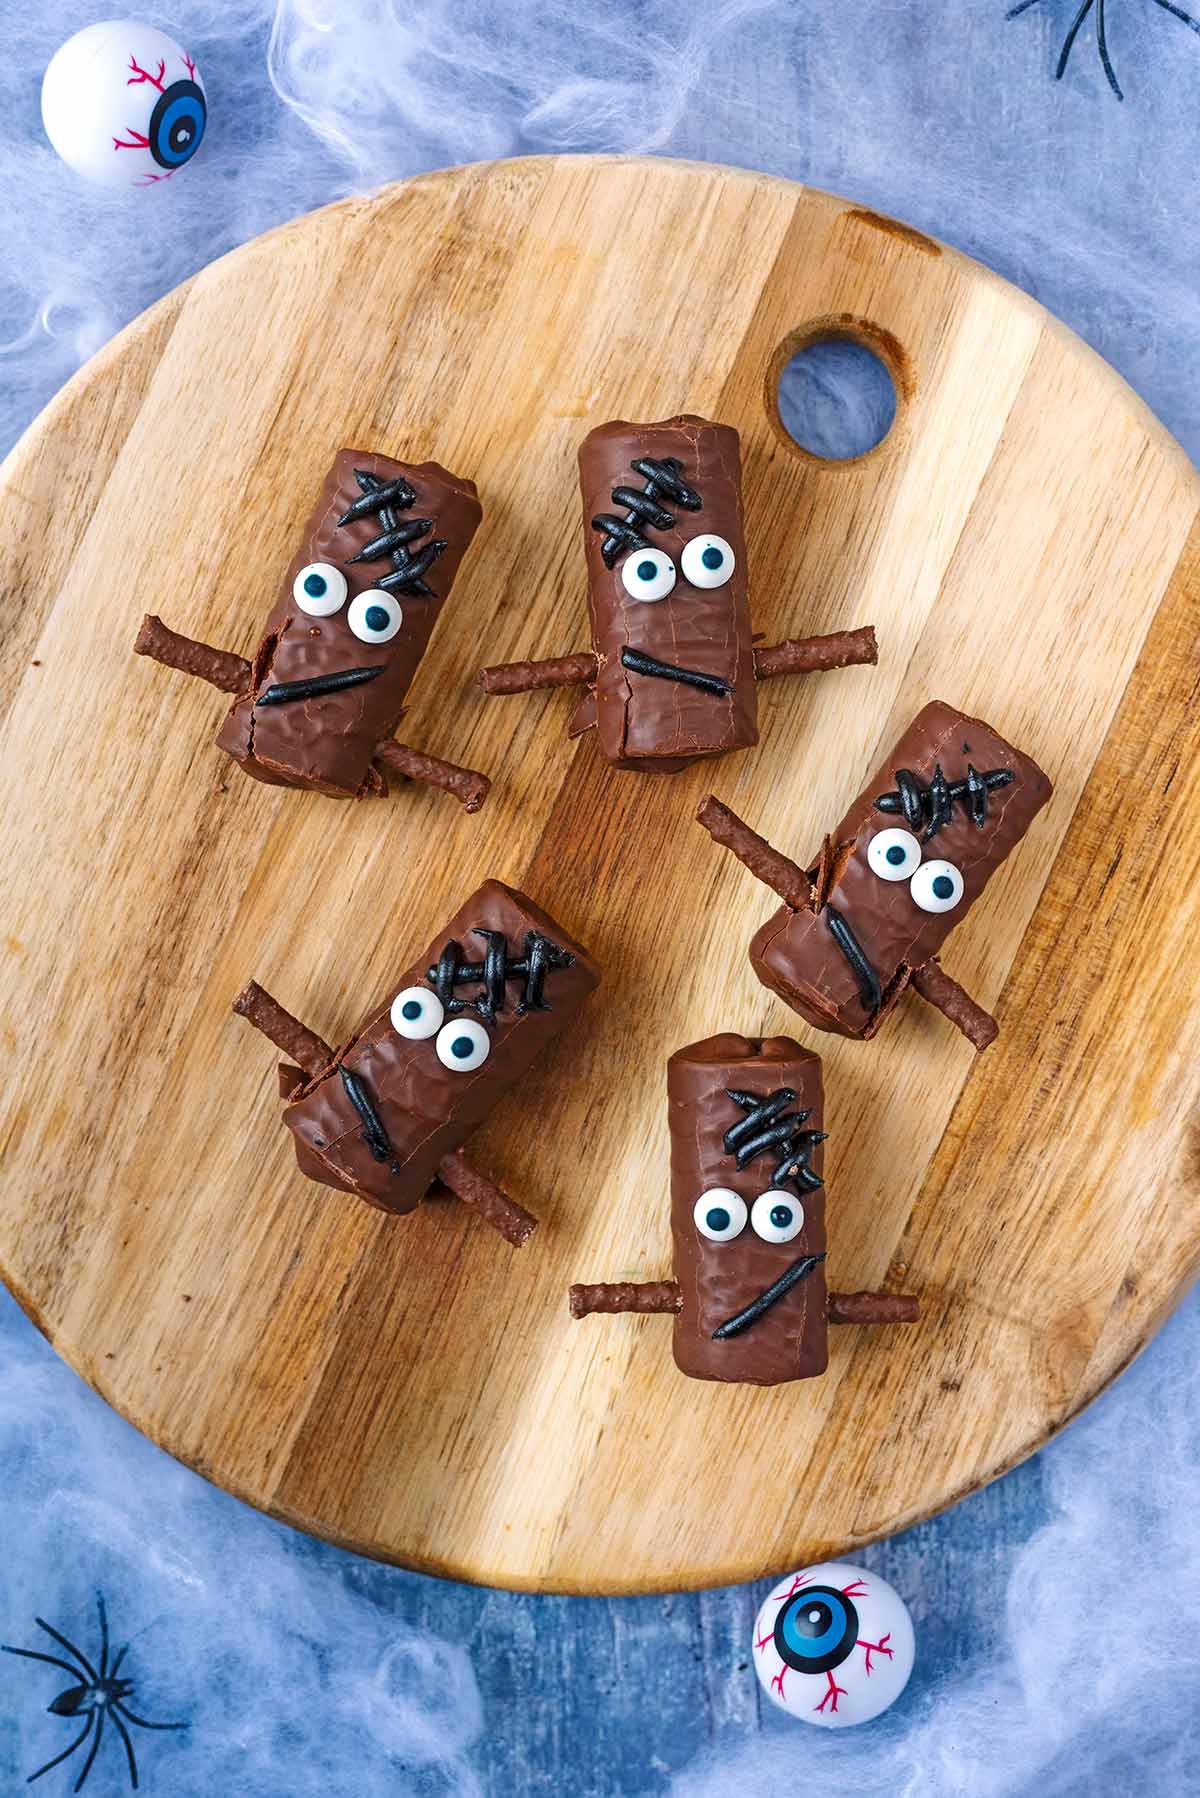 Five chocolate mini rolls decorated like Frankenstein's monster.